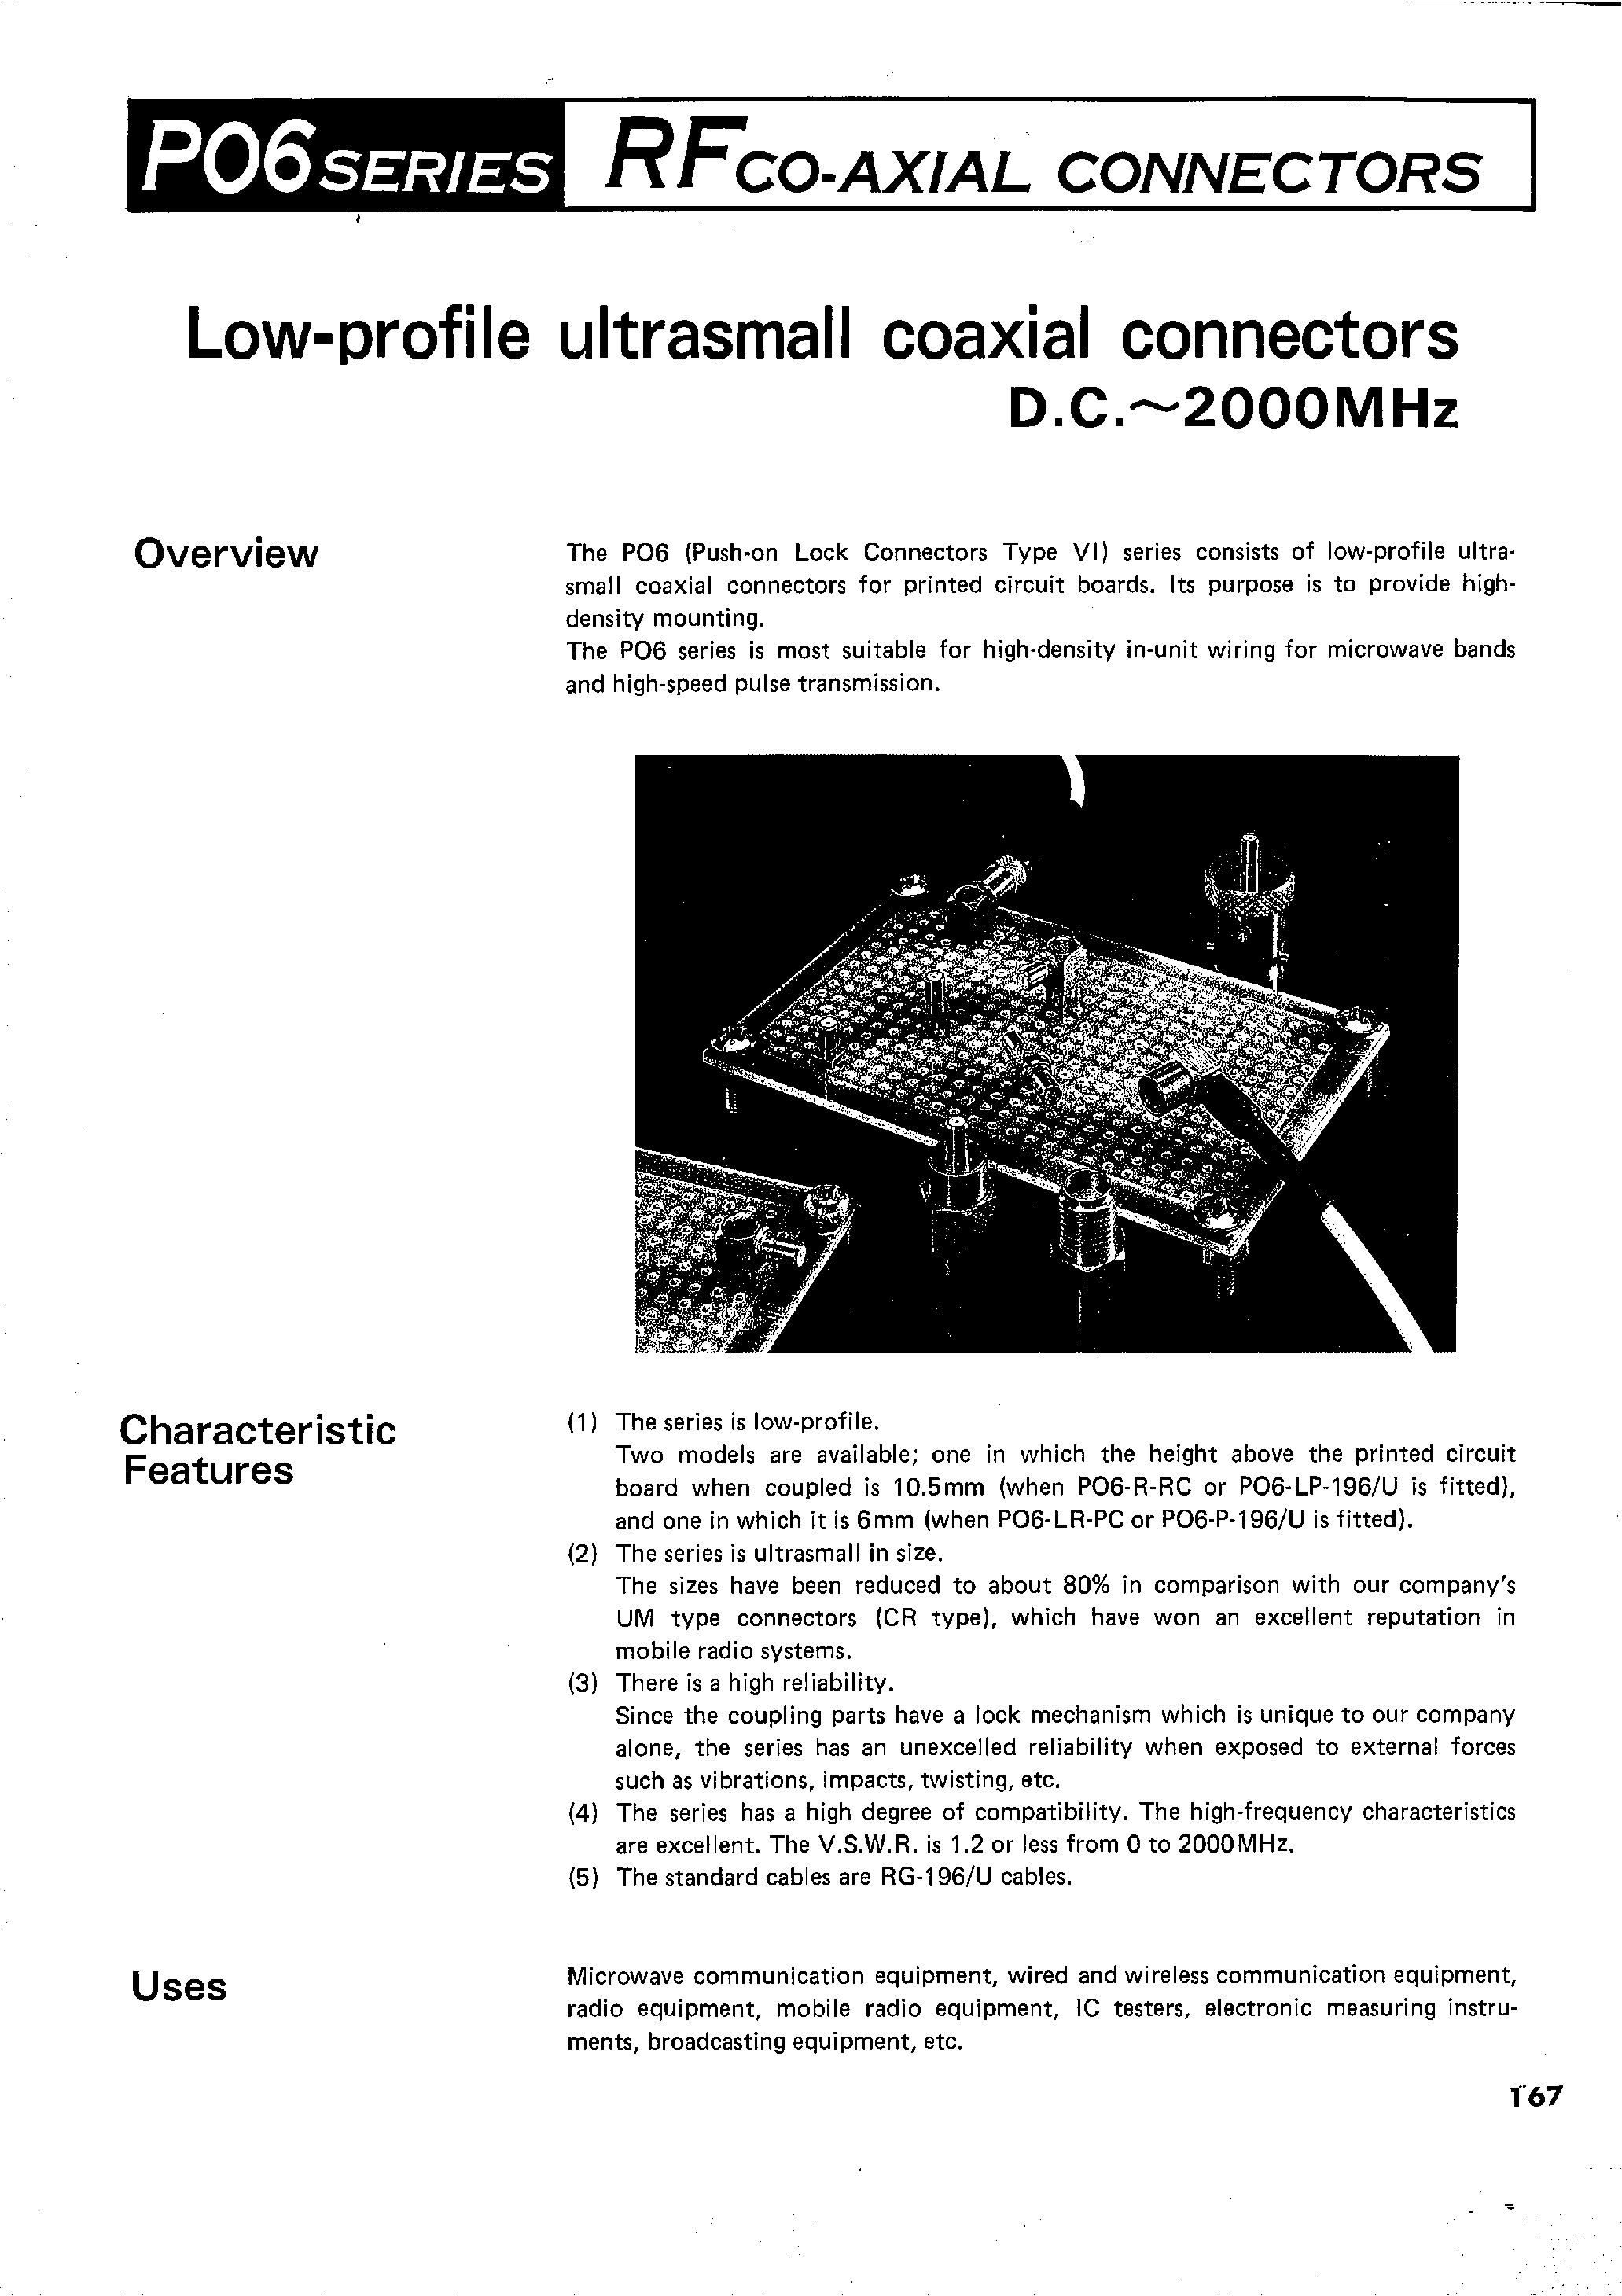 Даташит PO6-A-JJ - RFCO-AXIAL CONNECTORS(Low-profile ultrasmall coaxial connector) страница 1